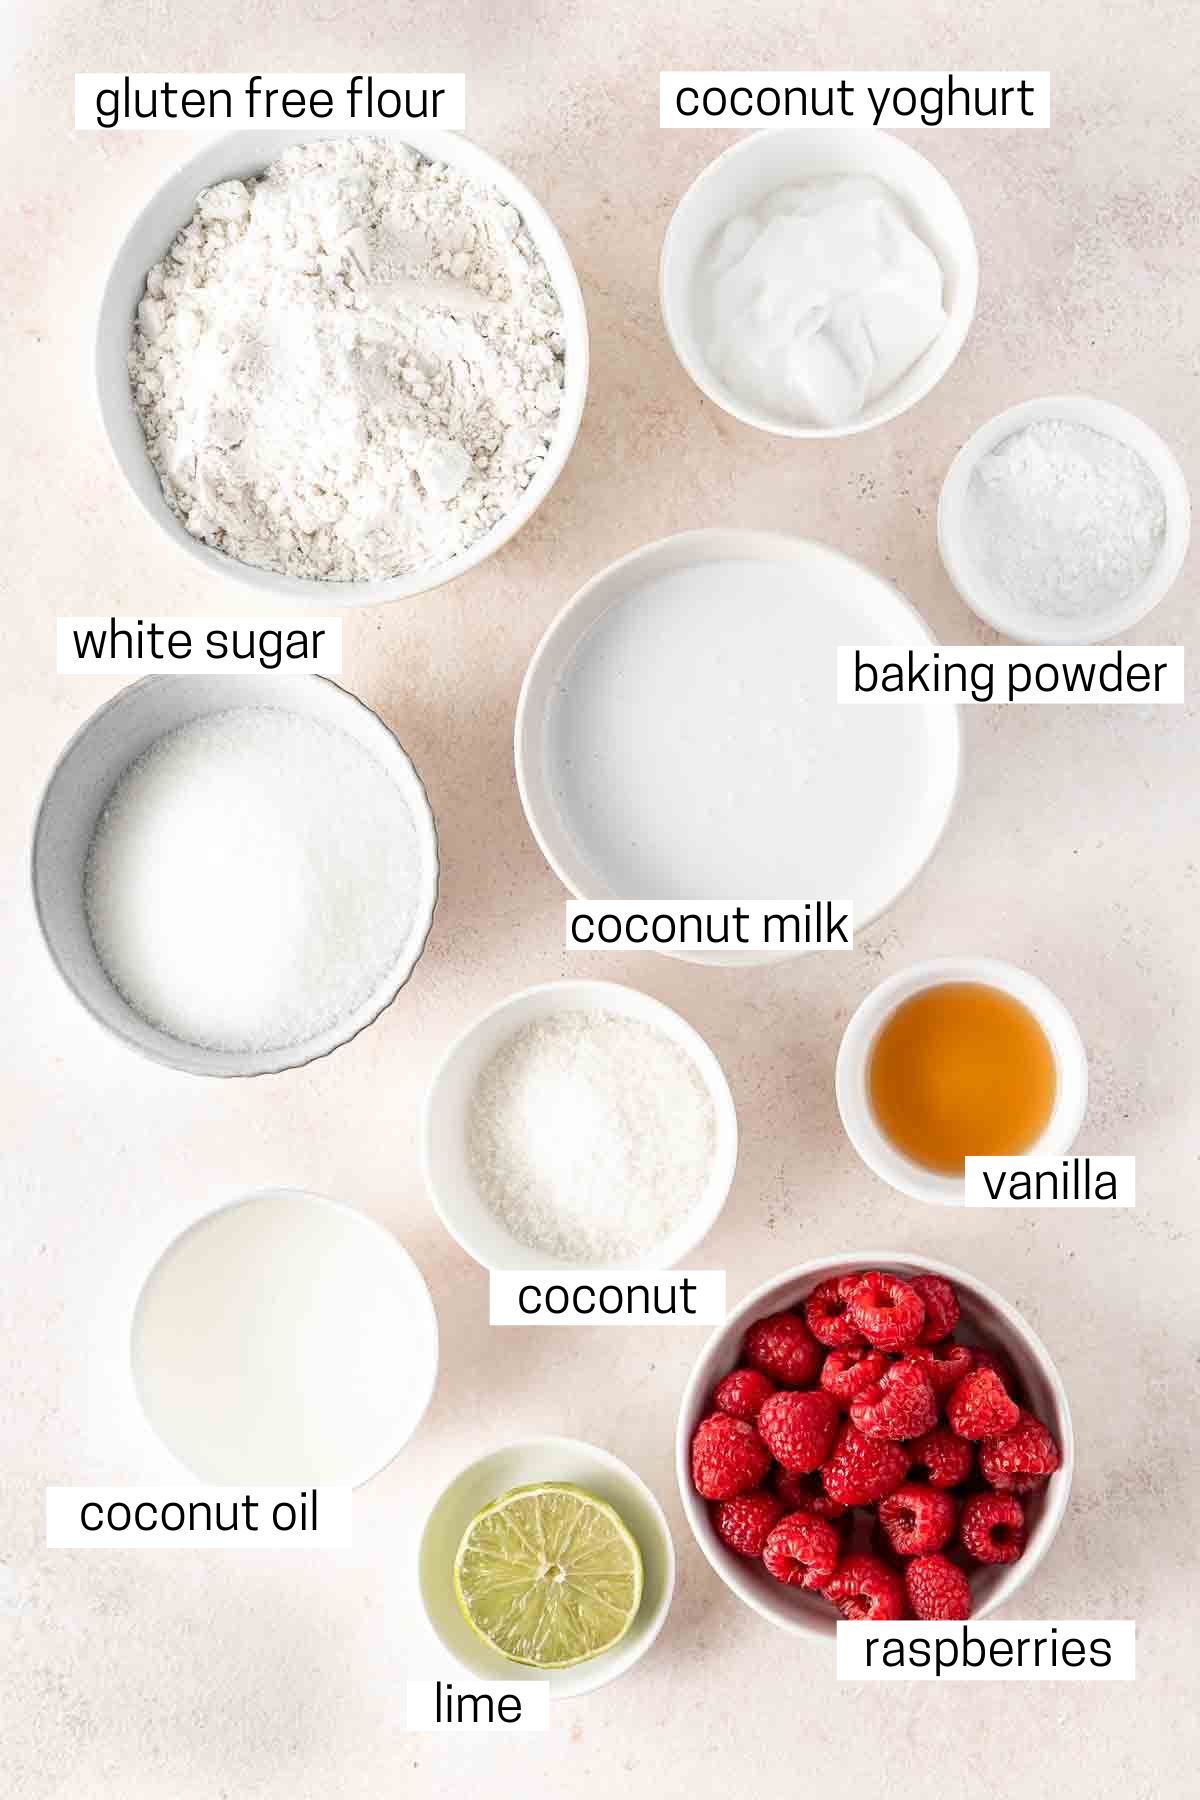 All ingredients needed to make raspberry coconut muffins laid out in small bowls.